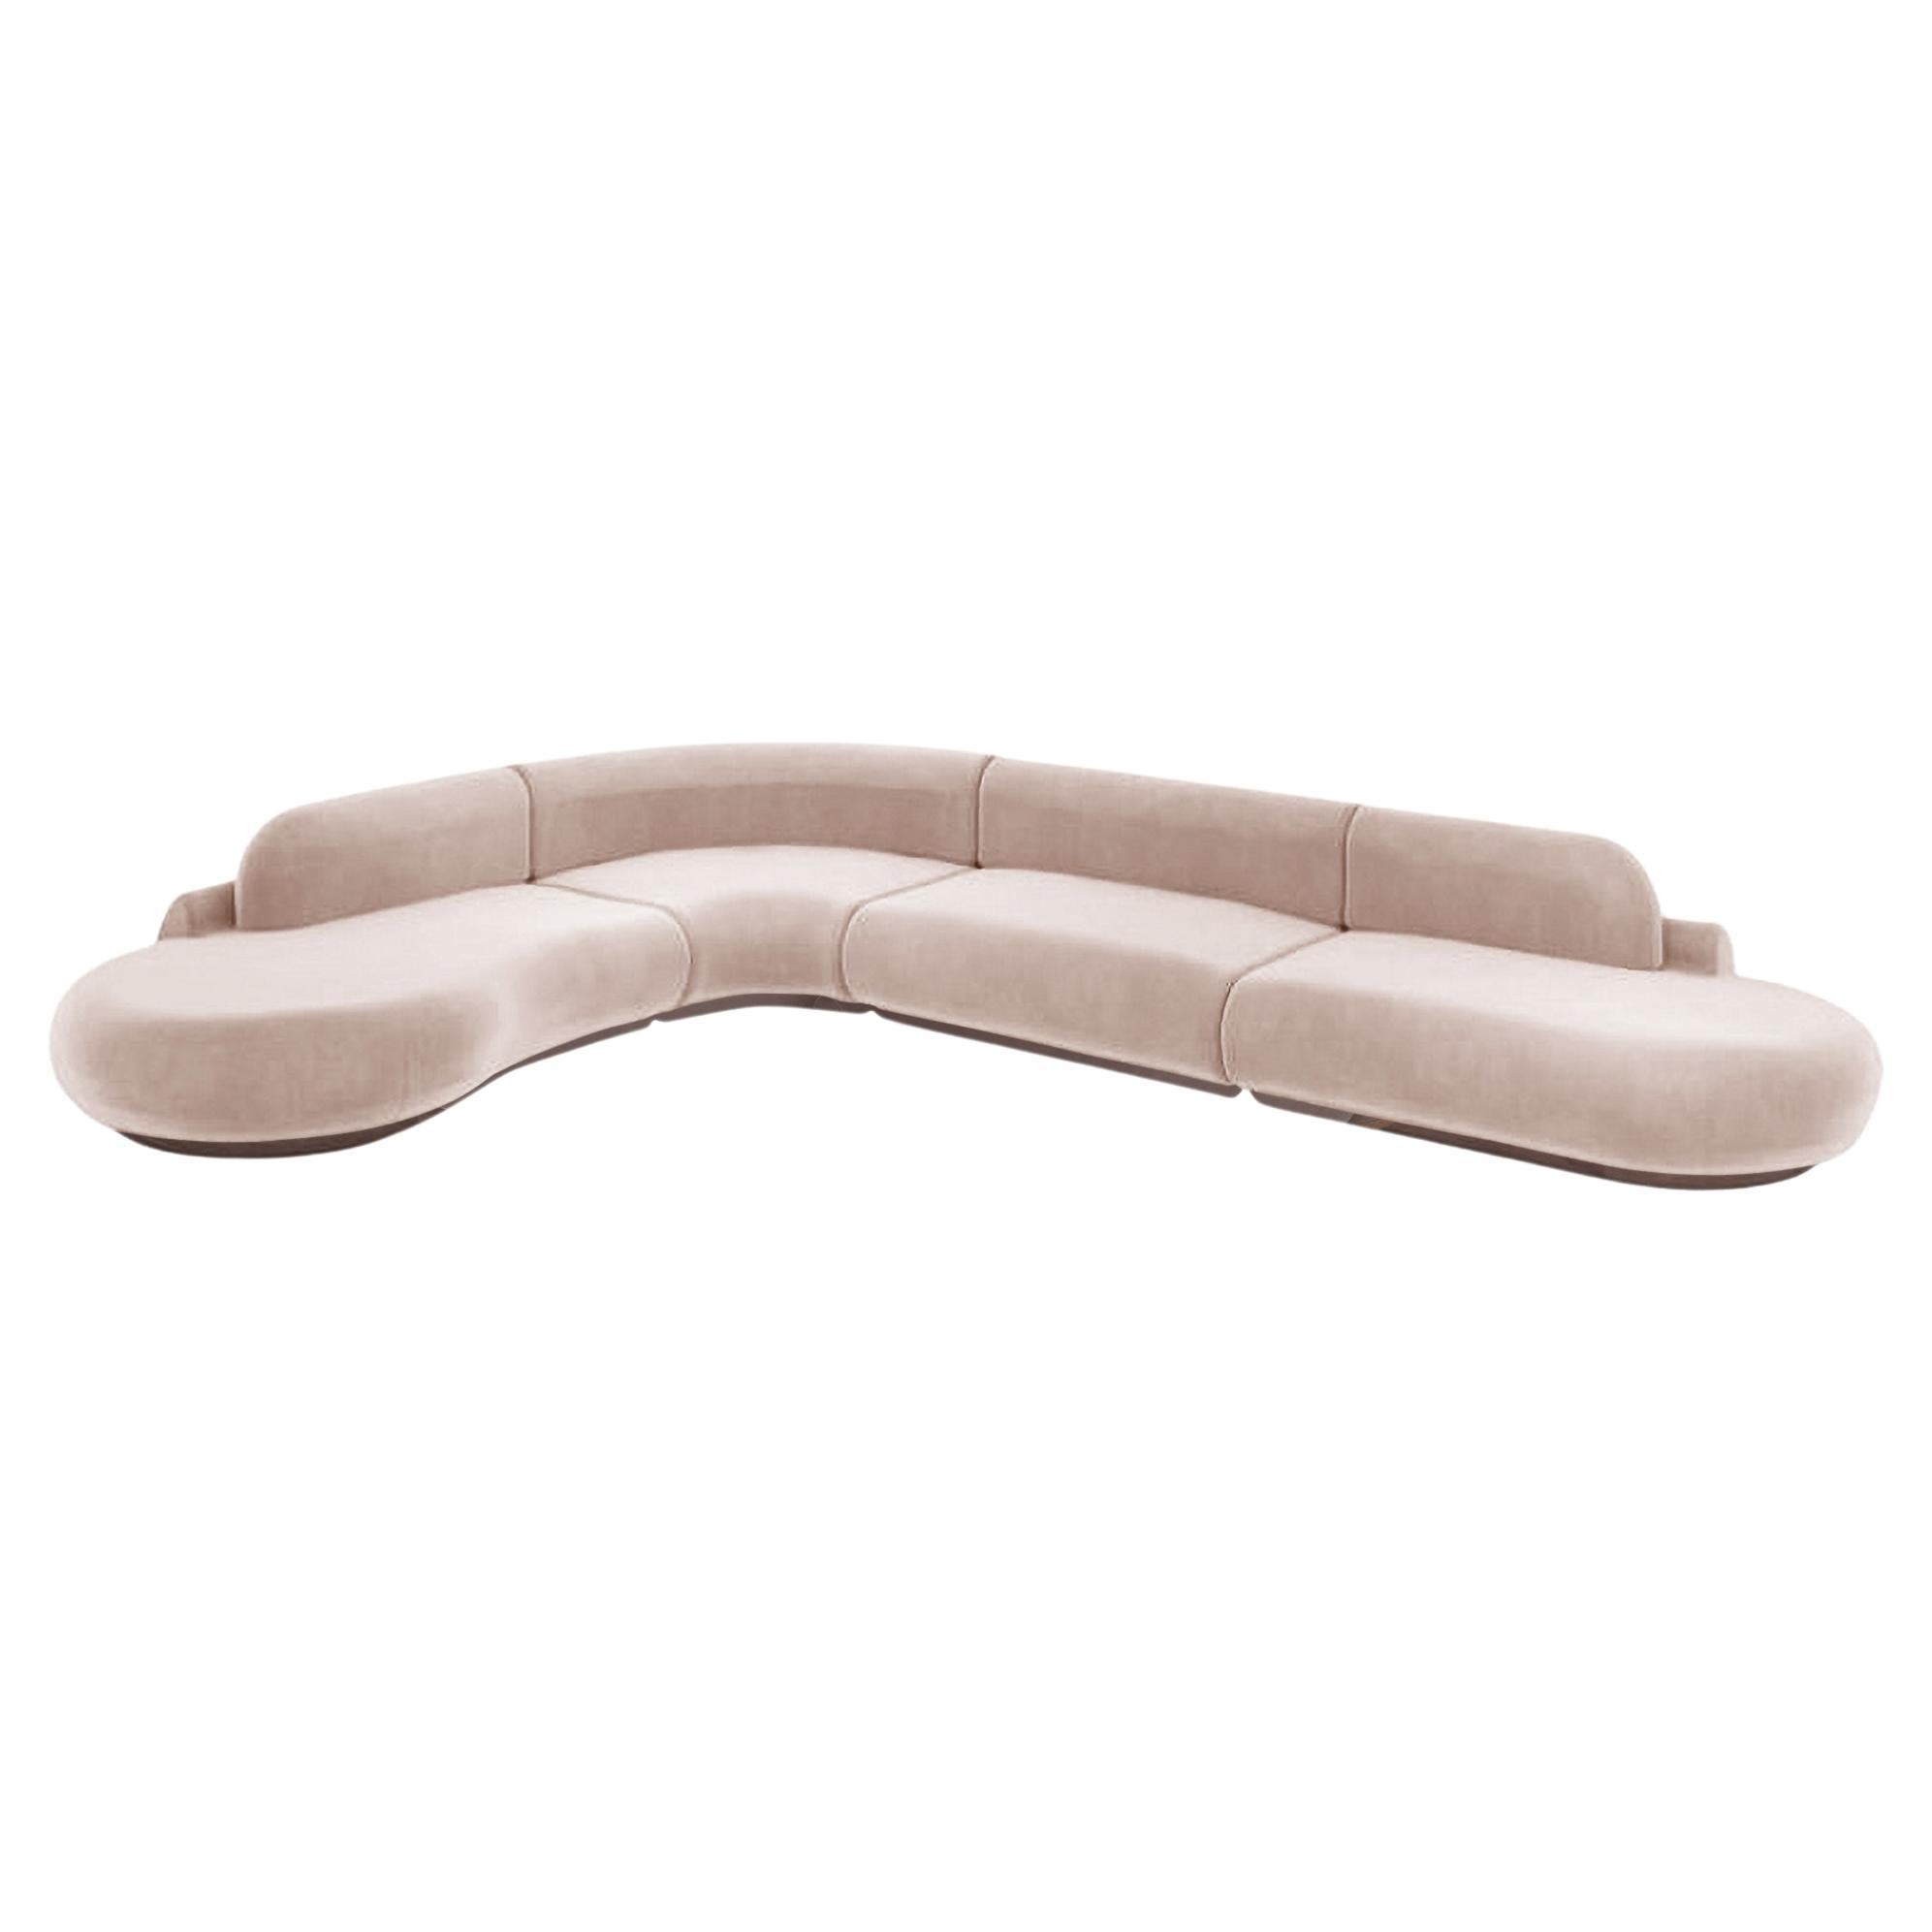 Naked Curved Sectional Sofa, 4 Piece with Beech Ash-056-1 and Vigo Blossom For Sale